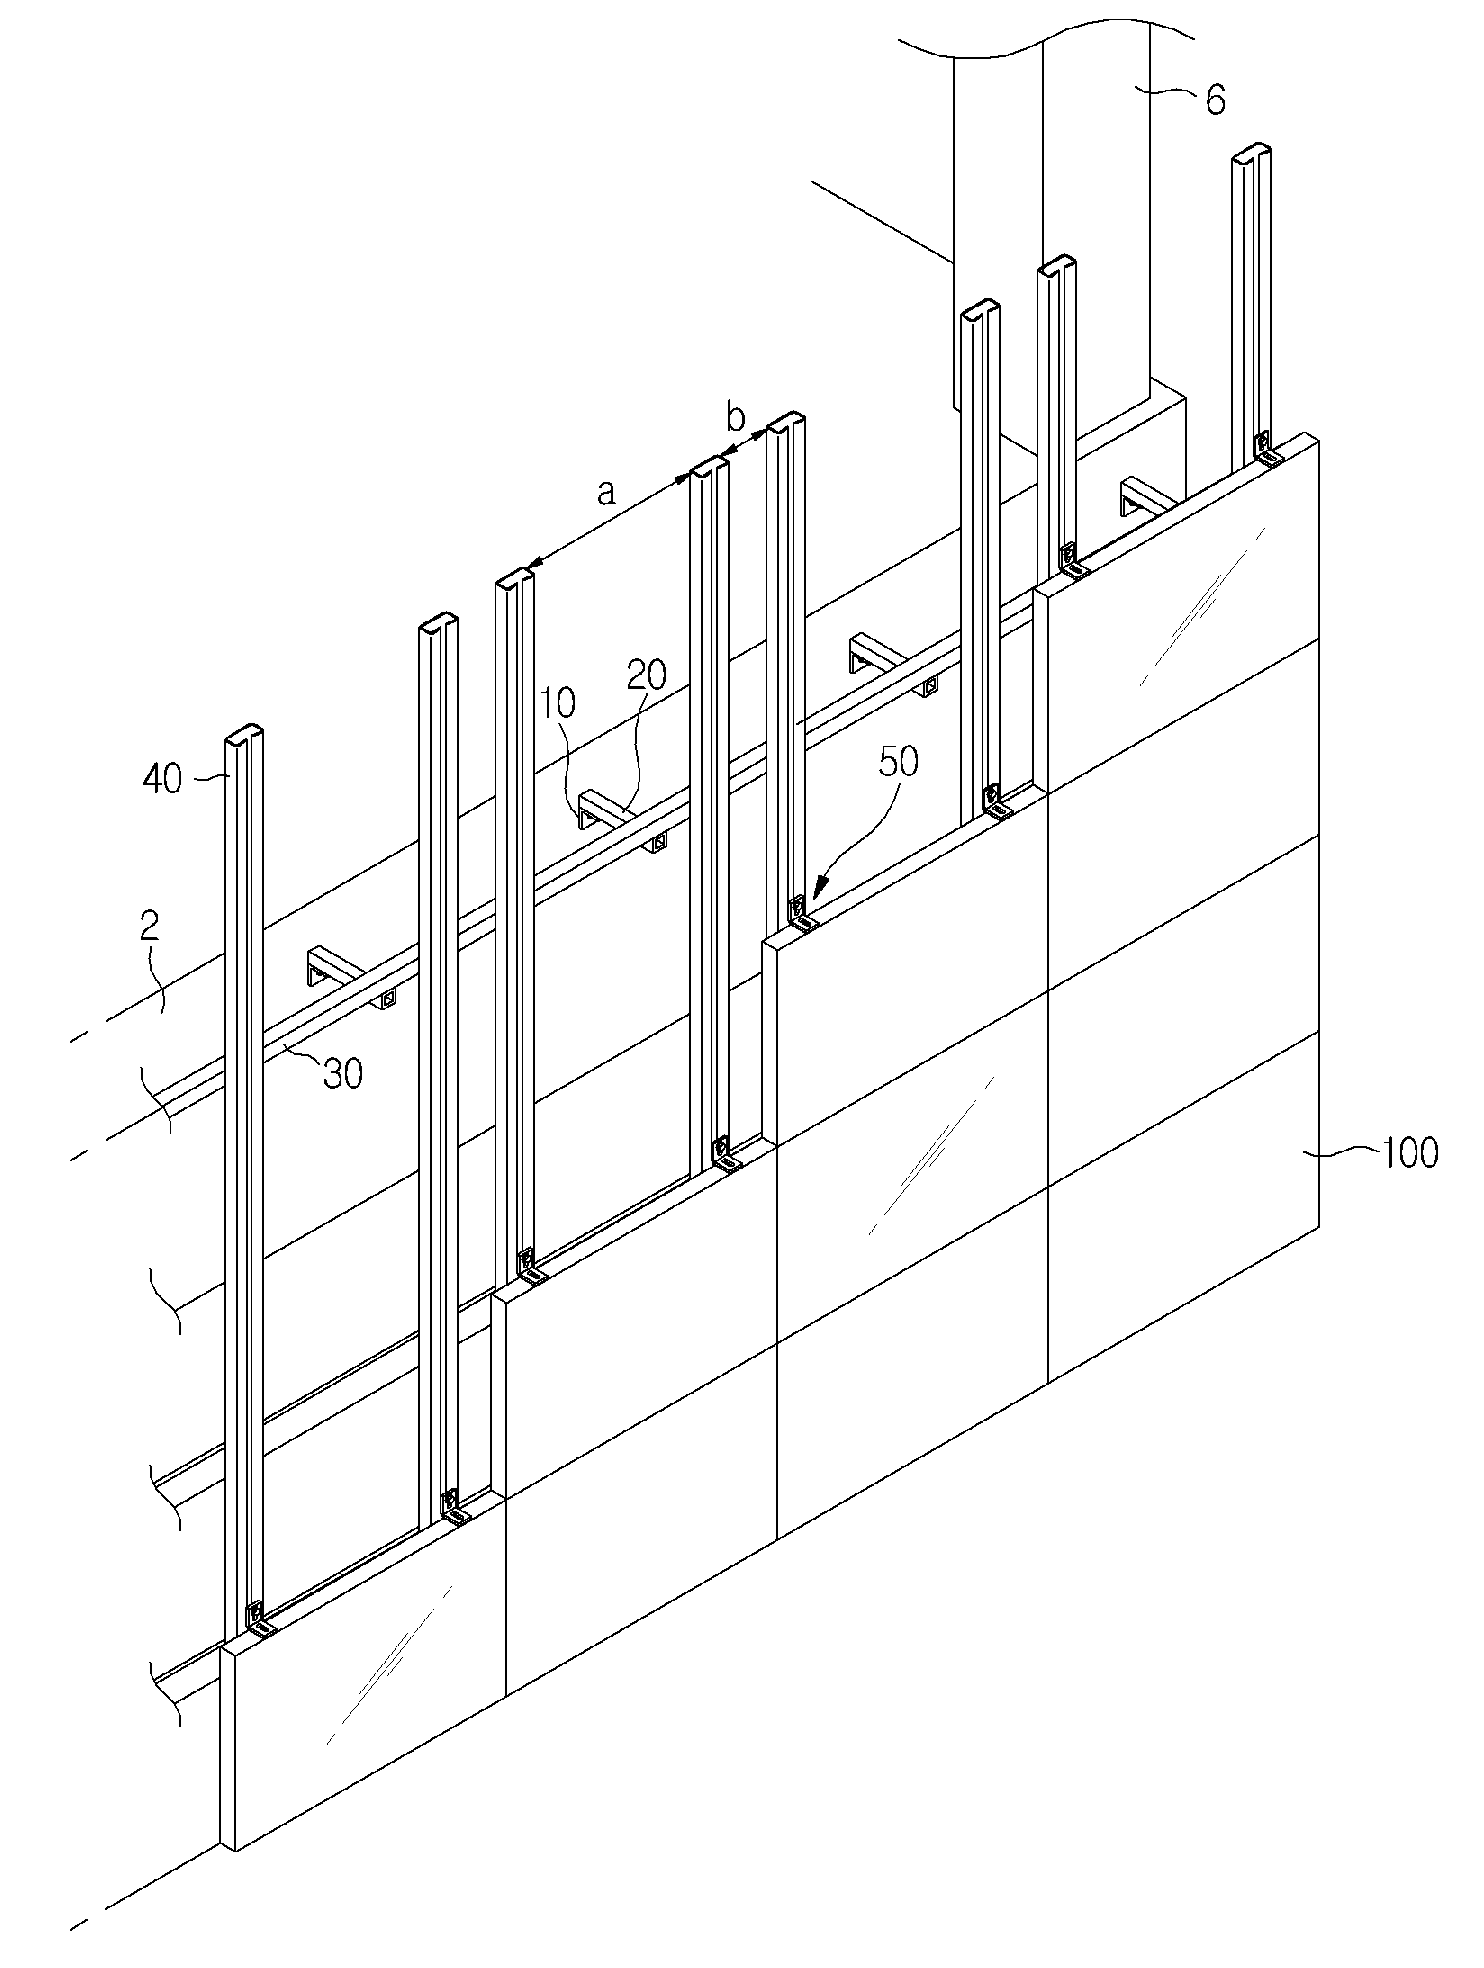 Outer-wall construction apparatus for building